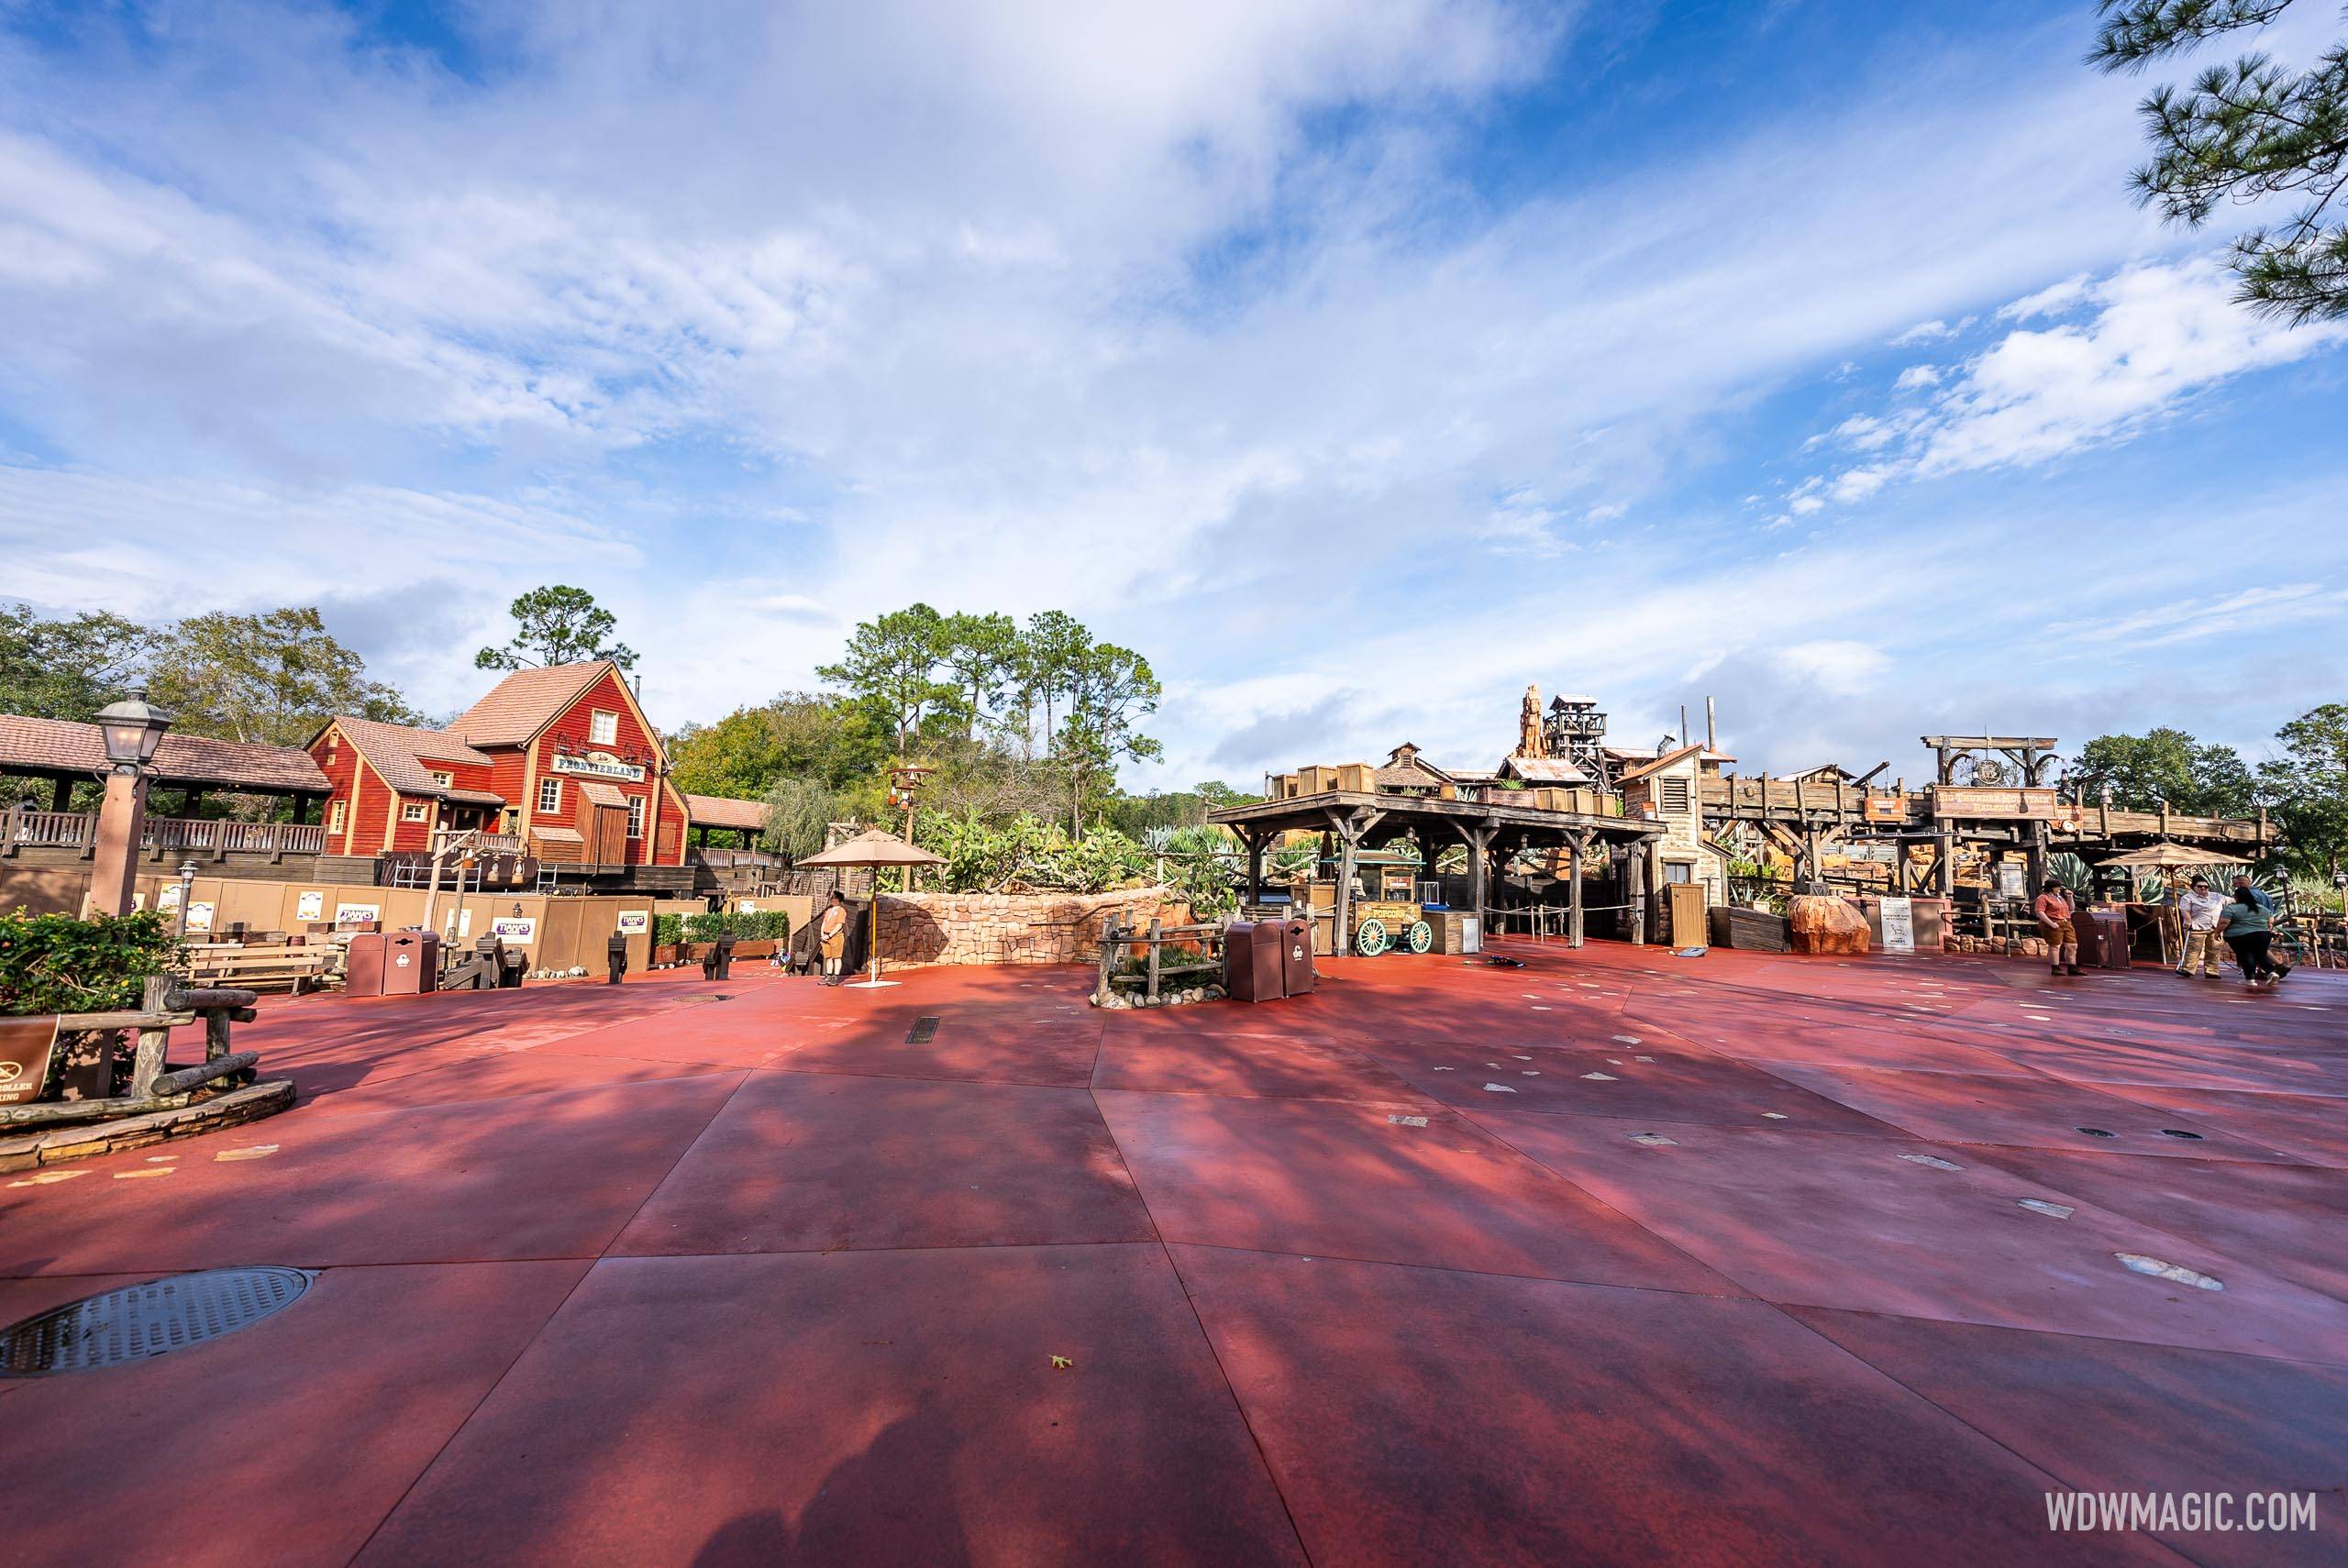 Restrooms closed at Tian's Bayou Adventure construction area